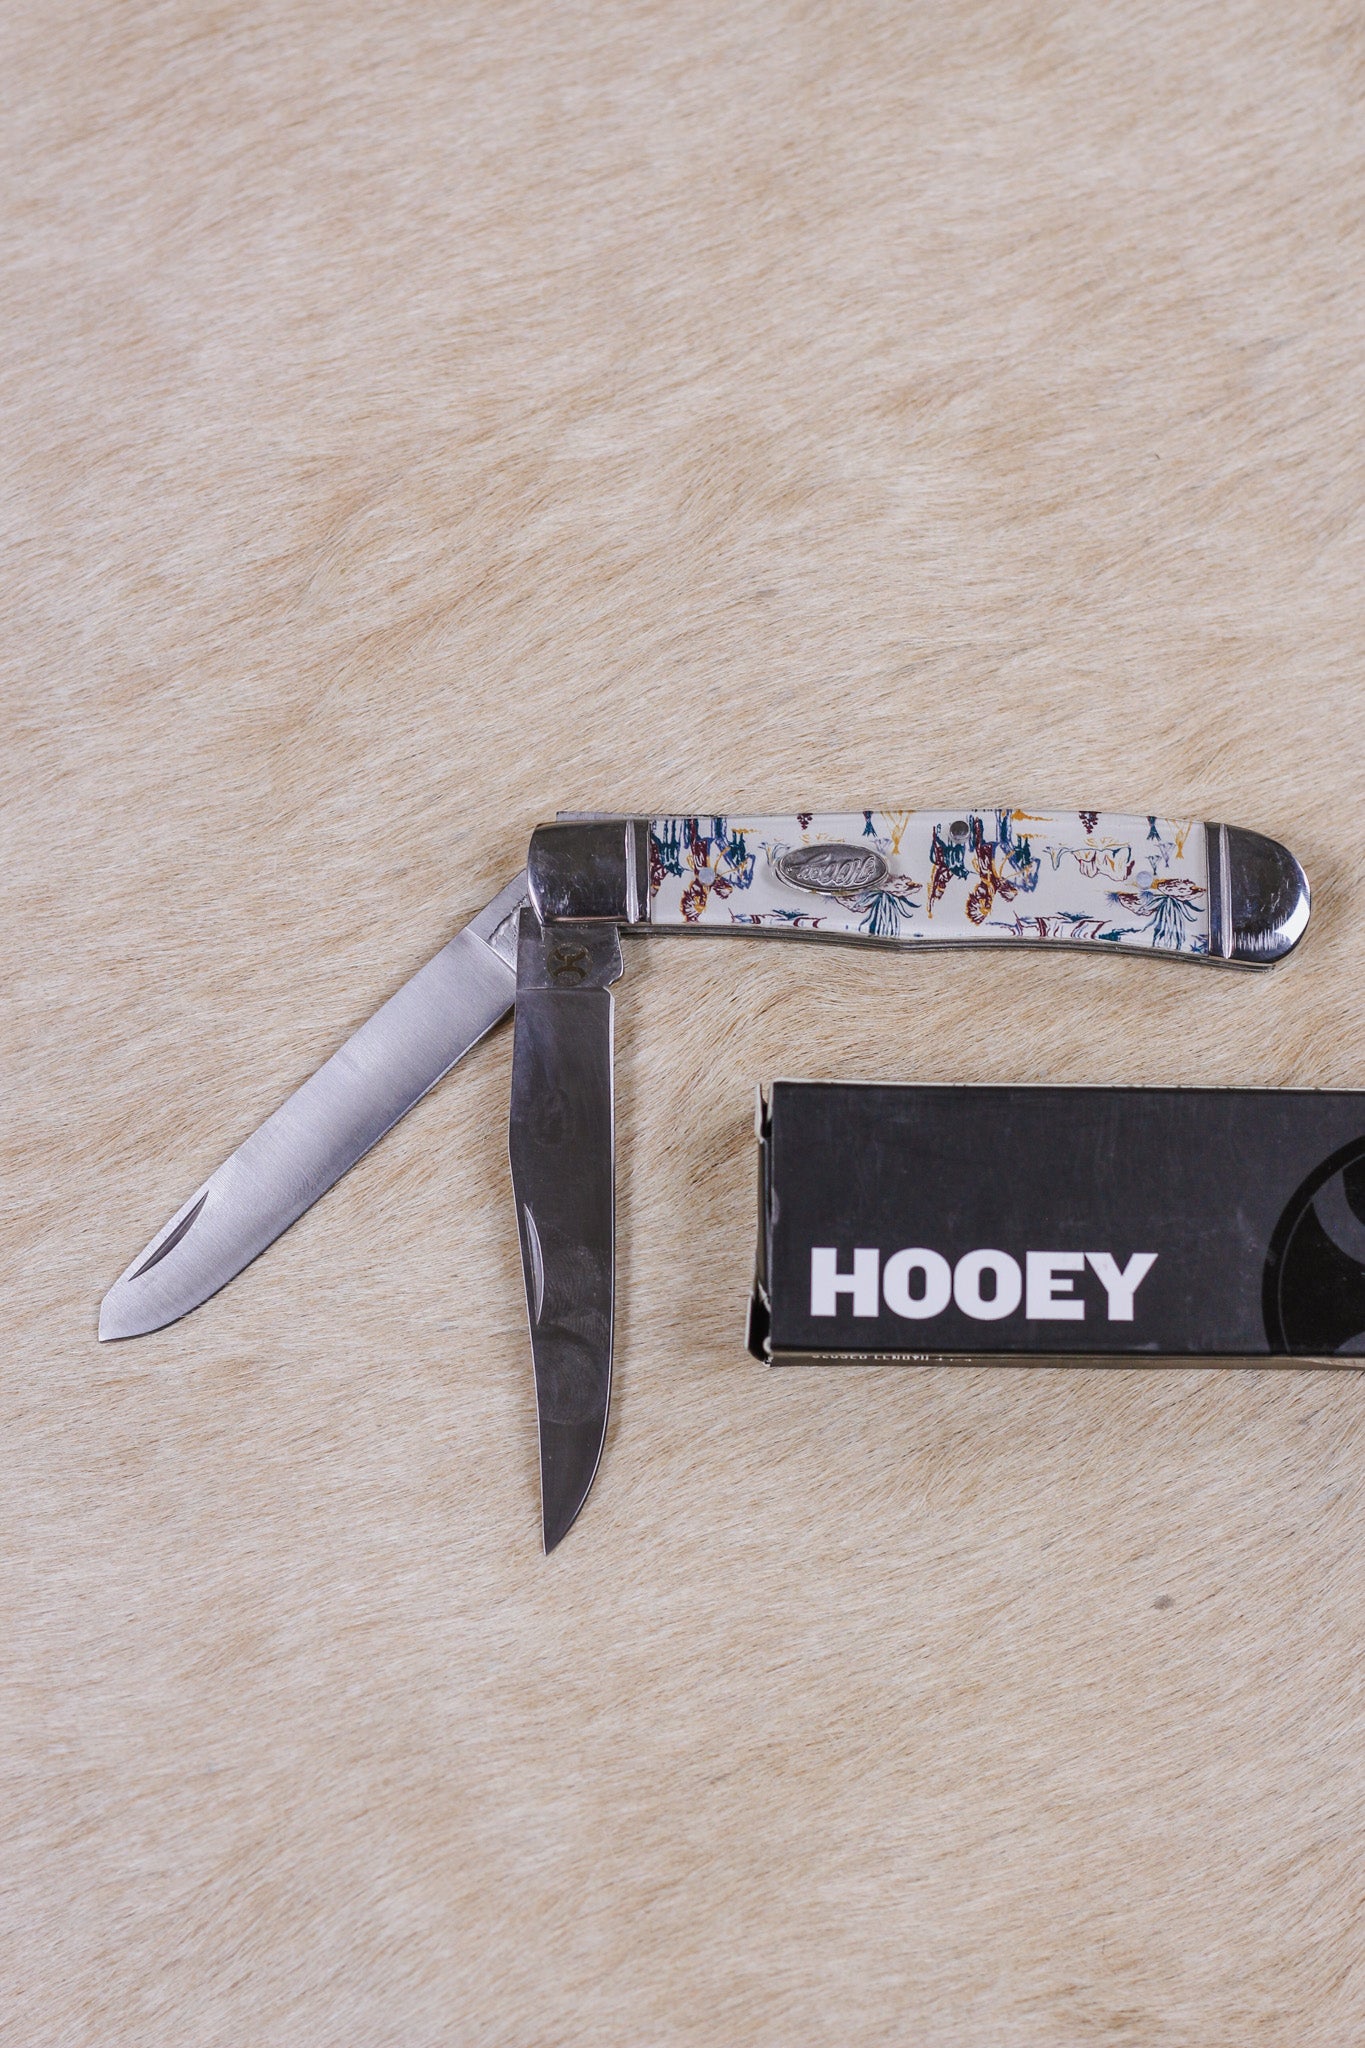 Chief Print Trapper Large Knife By Hooey